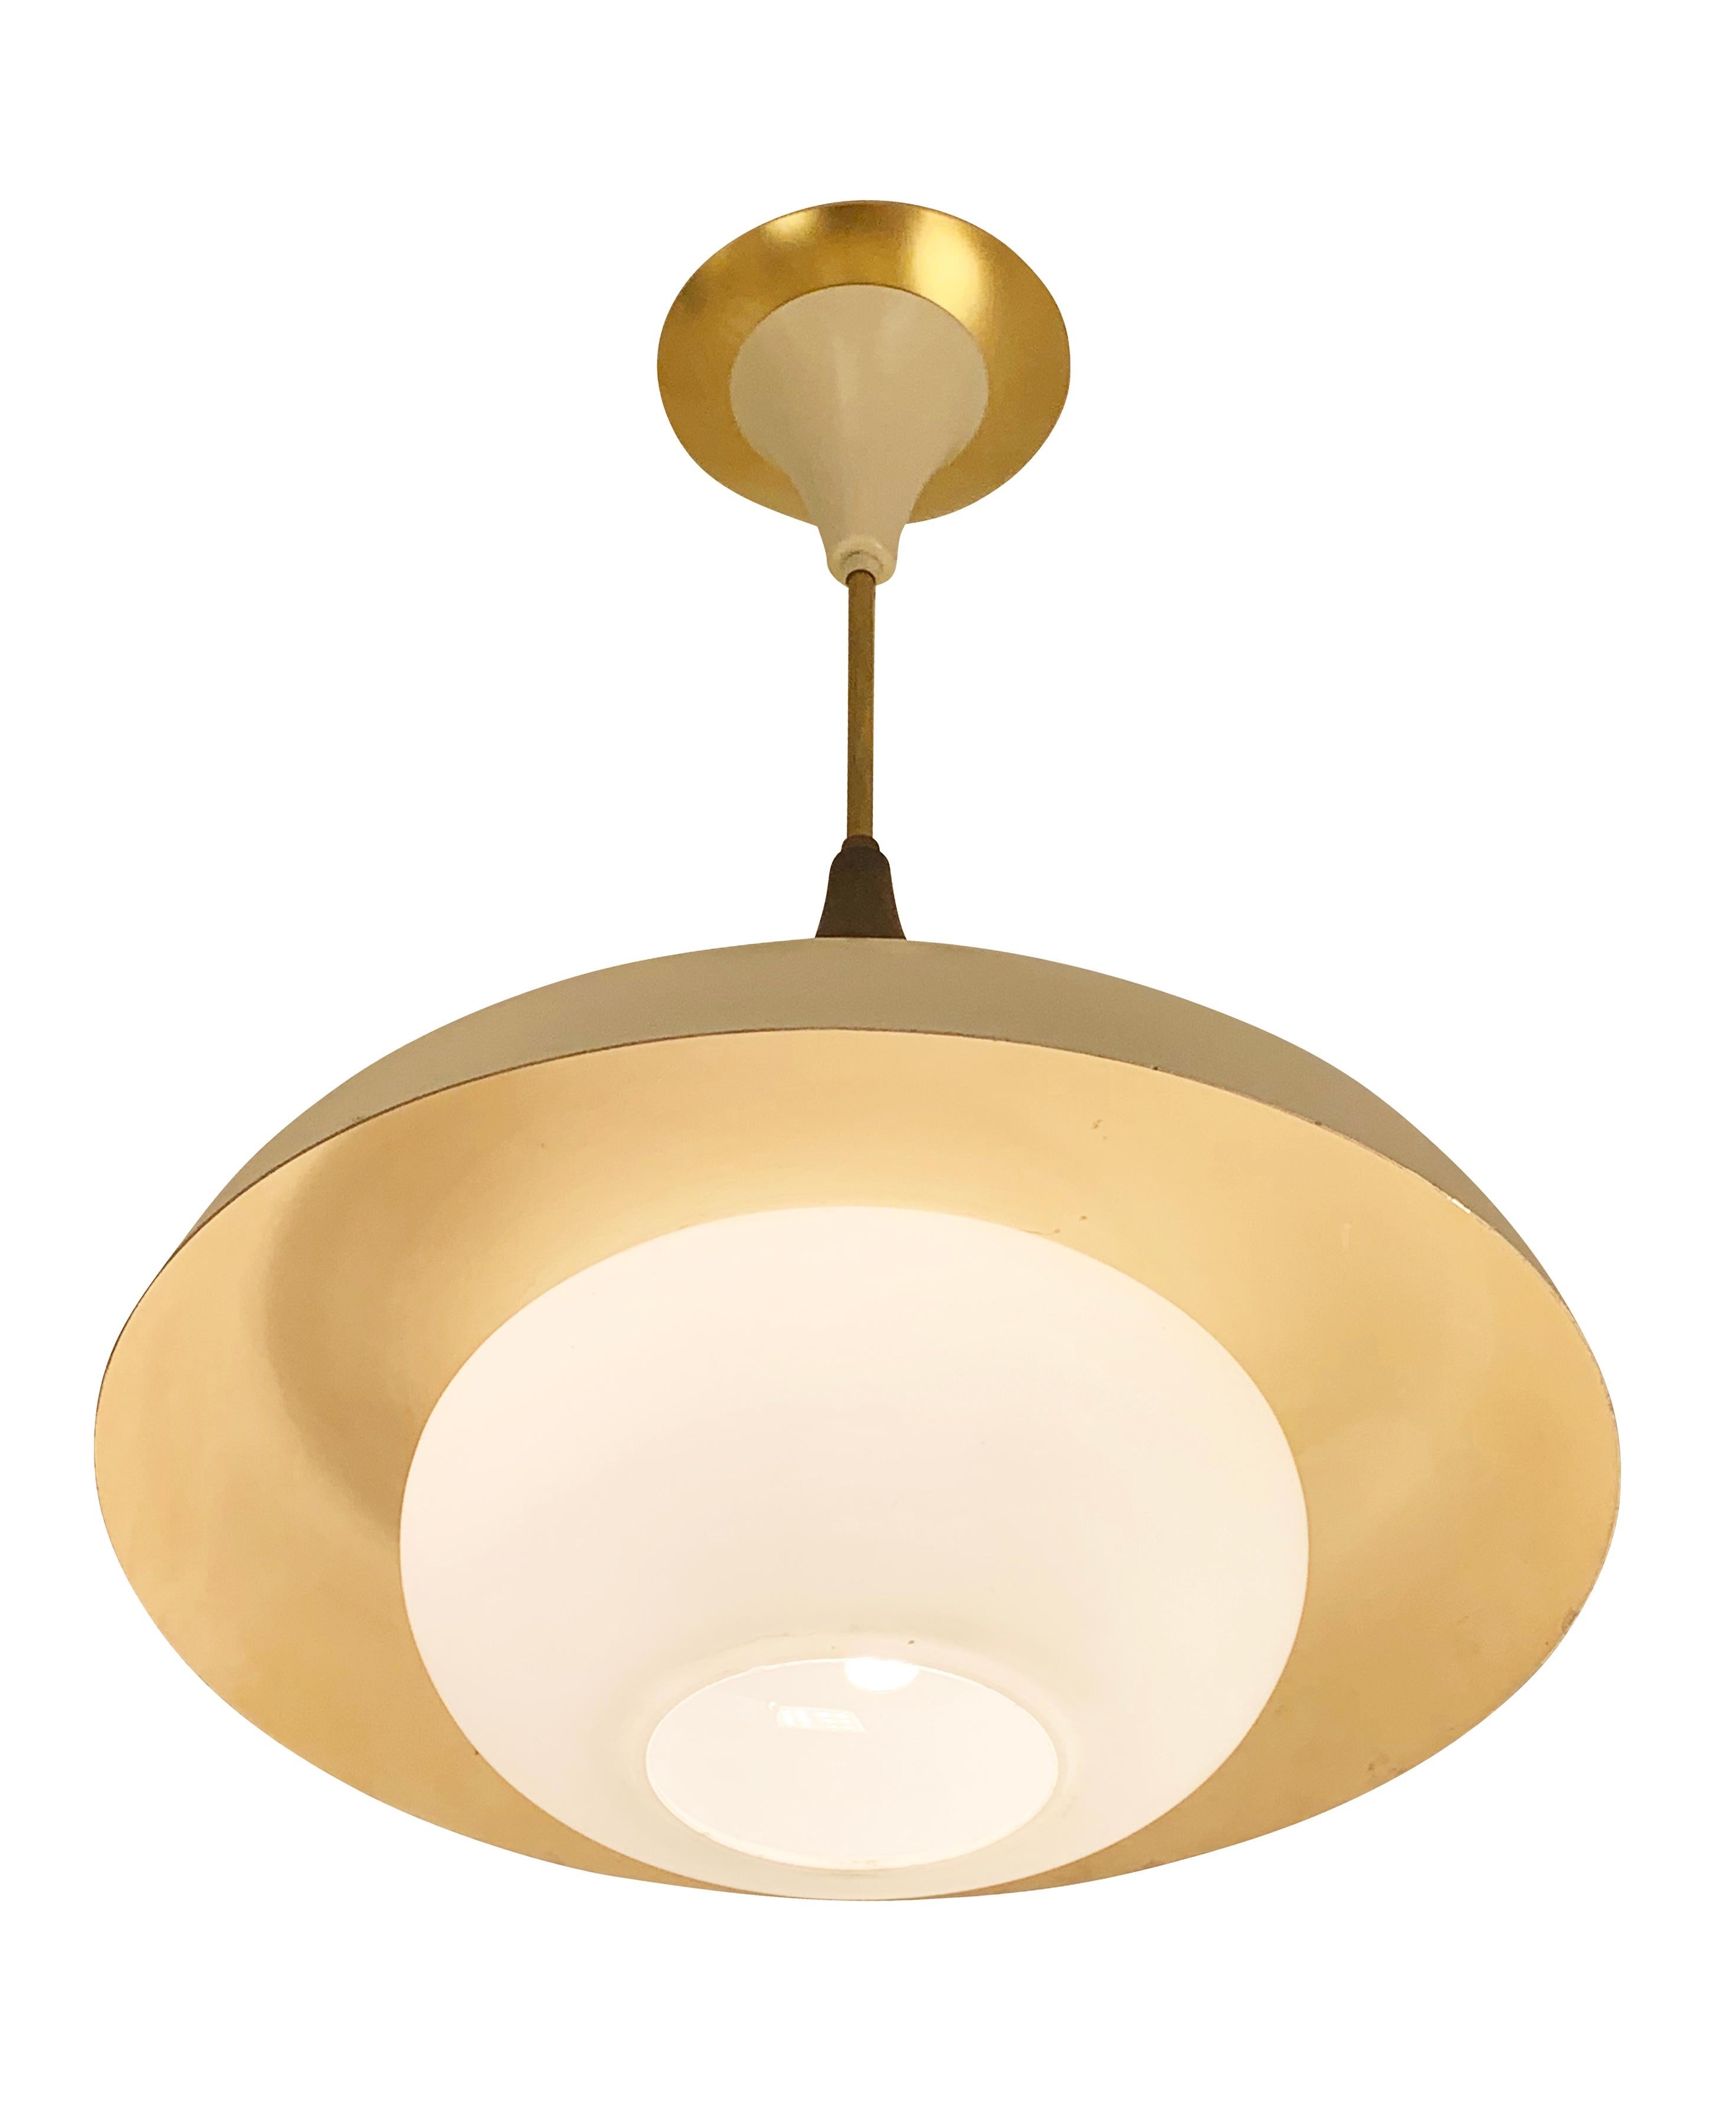 Petite and gracious Italian Mid-Century pendant with a frosted glass diffuser and off-white lacquered framing. Brass details. Height of stem can be adjusted as needed.

Condition: Excellent vintage condition, minor wear consistent with age and